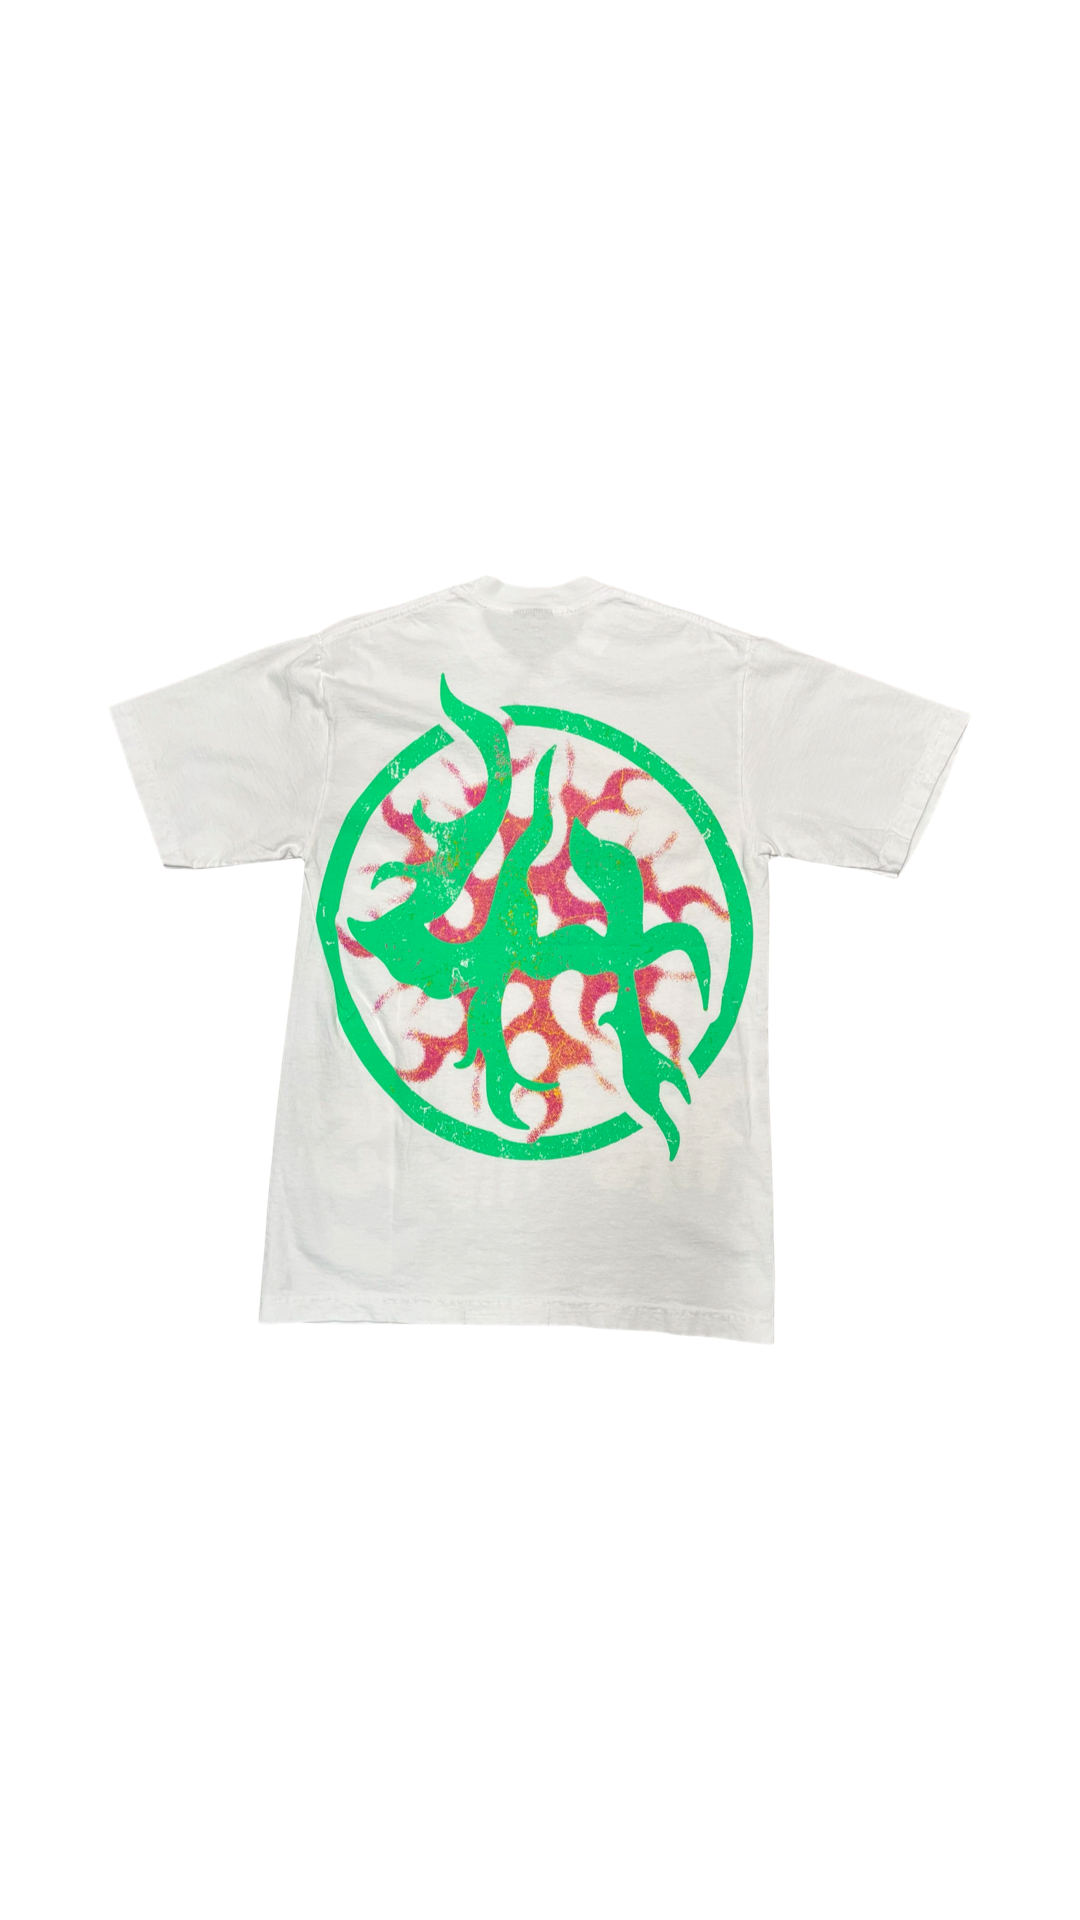 Lost hills “Lith II” tee (White)